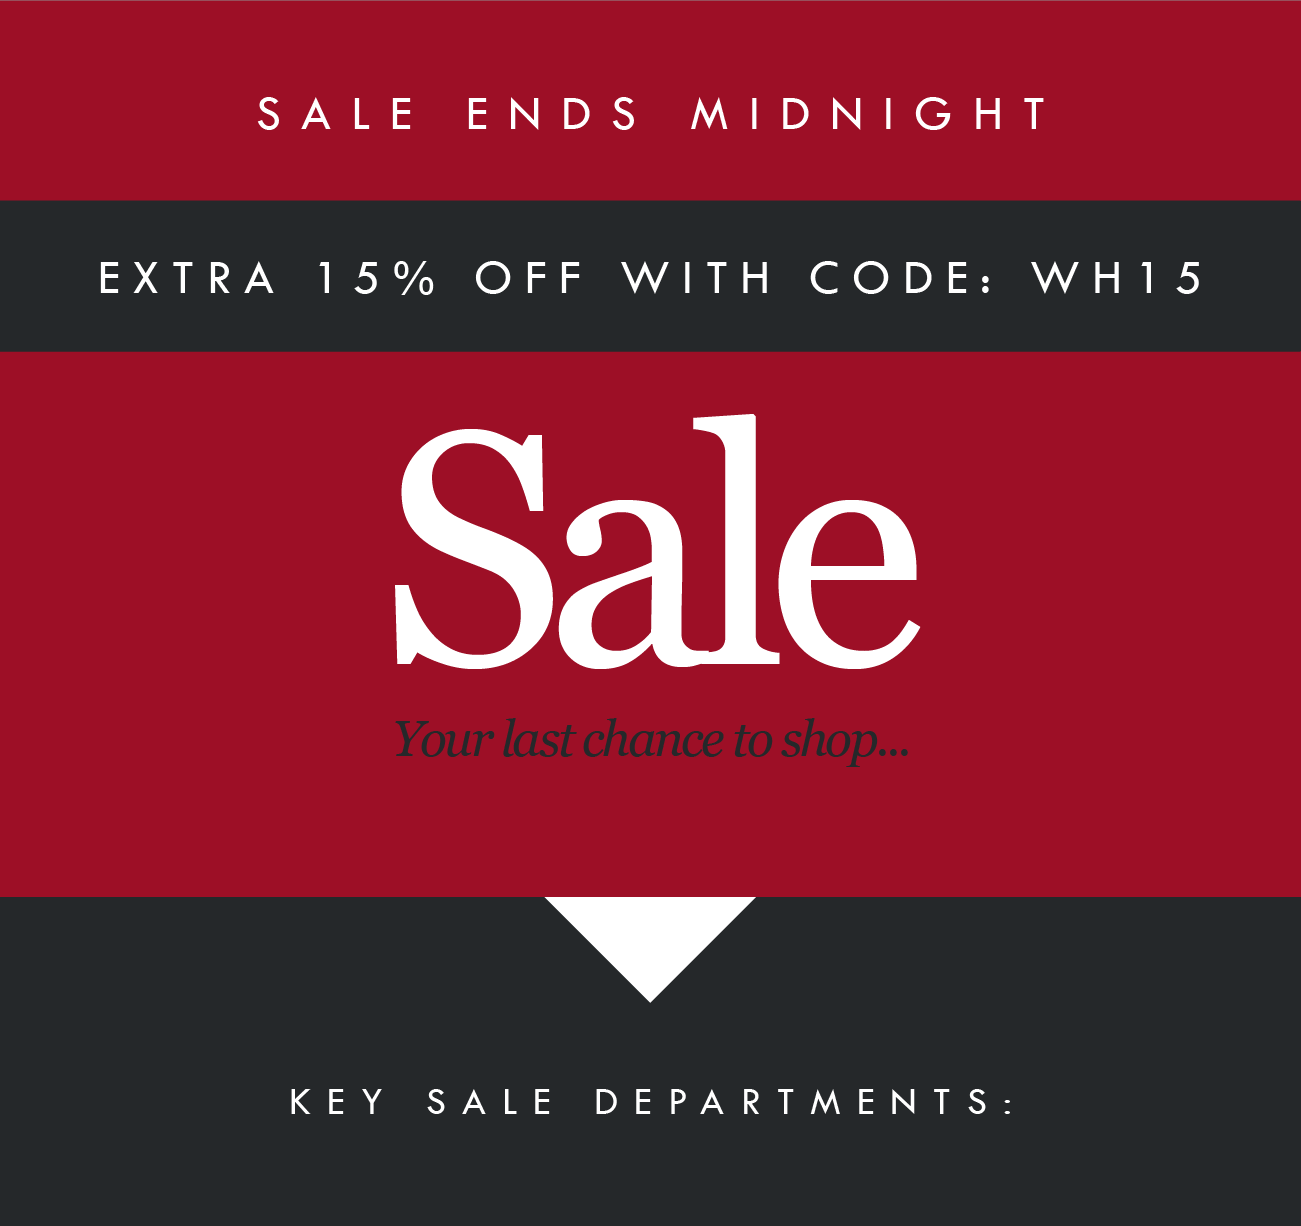 SALE ENDS MIDNIGHT
EXTRA 15% OFF WITH CODE: WH15
Sale
KEY SALE DEPARTMENTS :